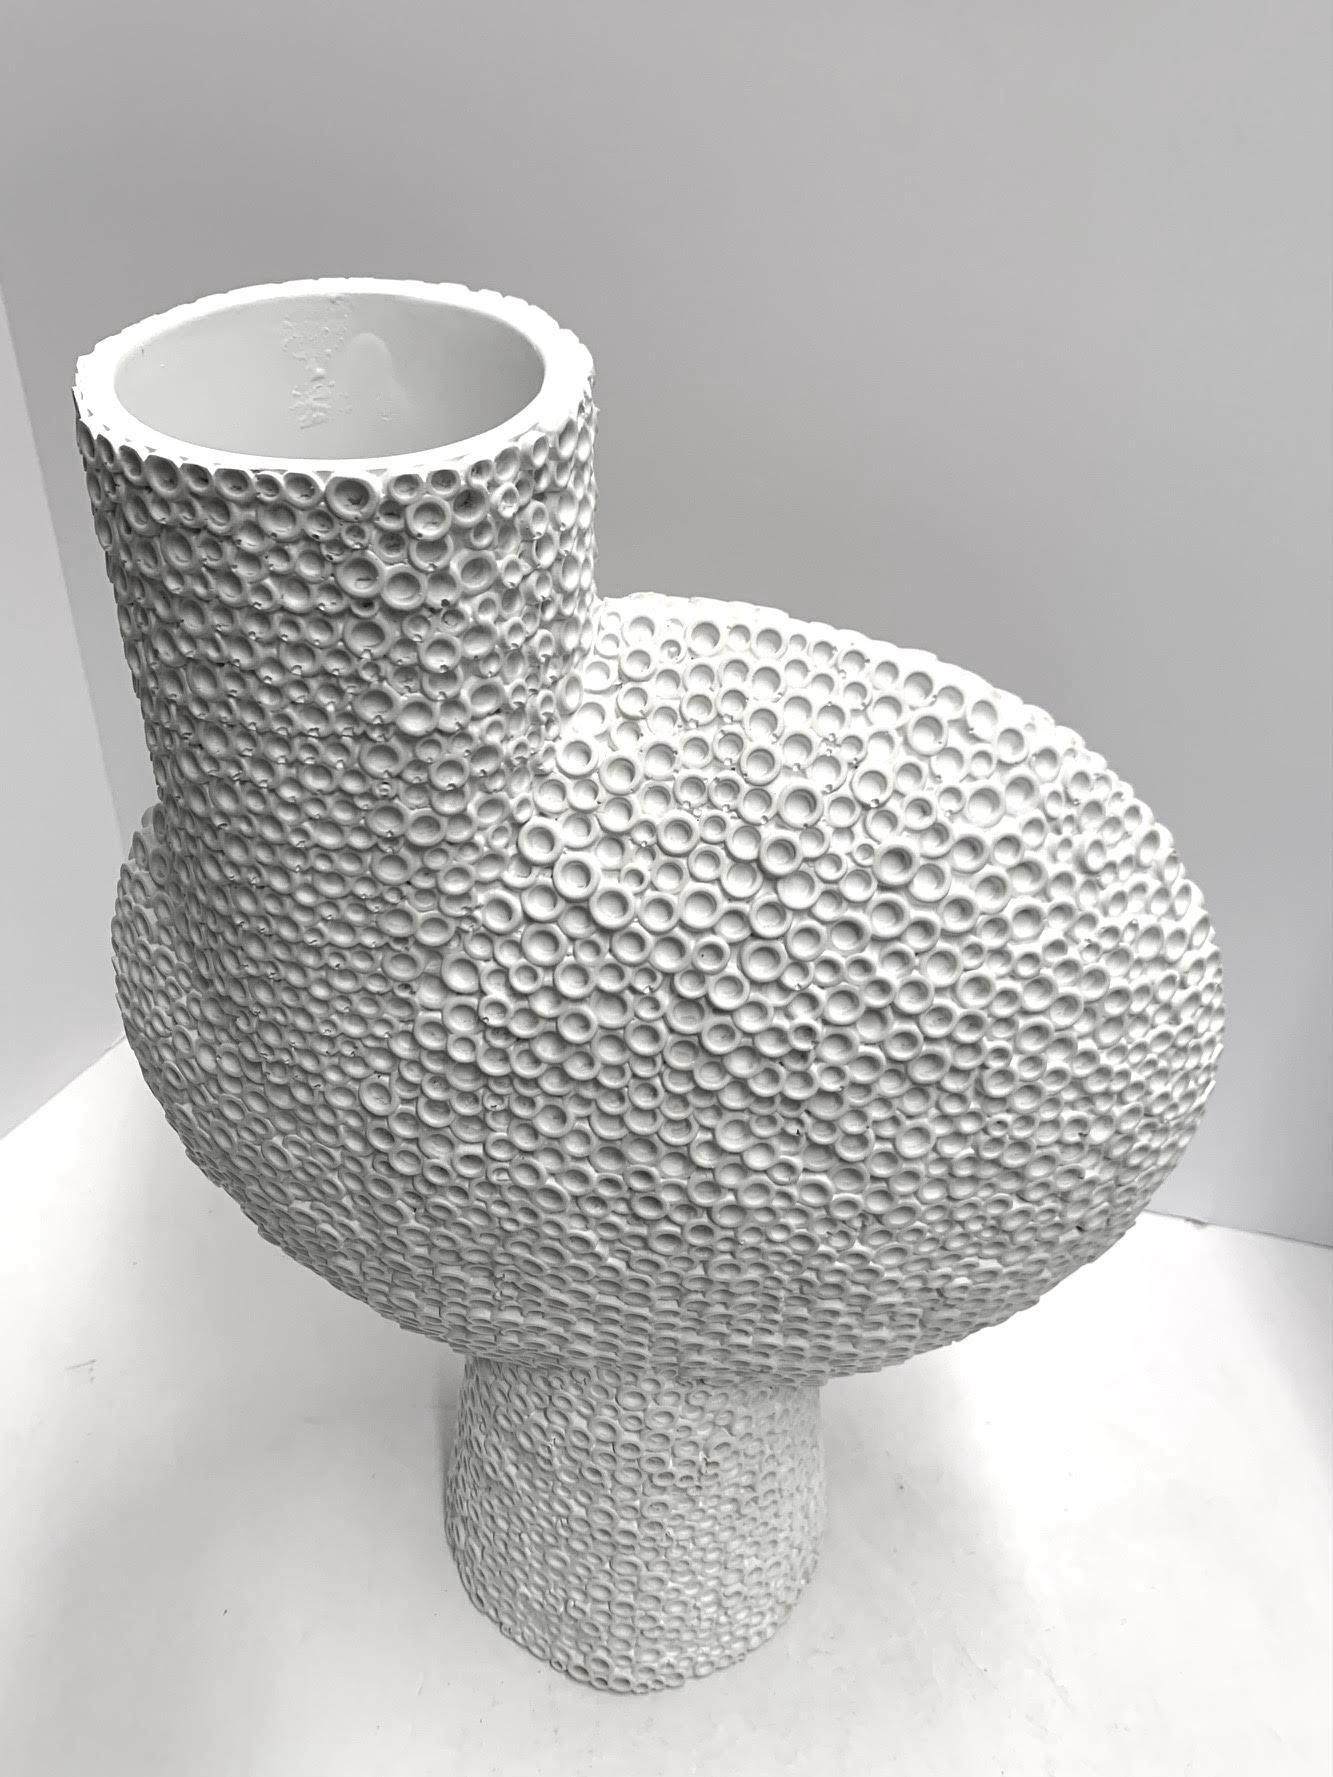 Contemporary Danish designed bone large white off center vase.
Bold surface texture.
Part of a very large collection.